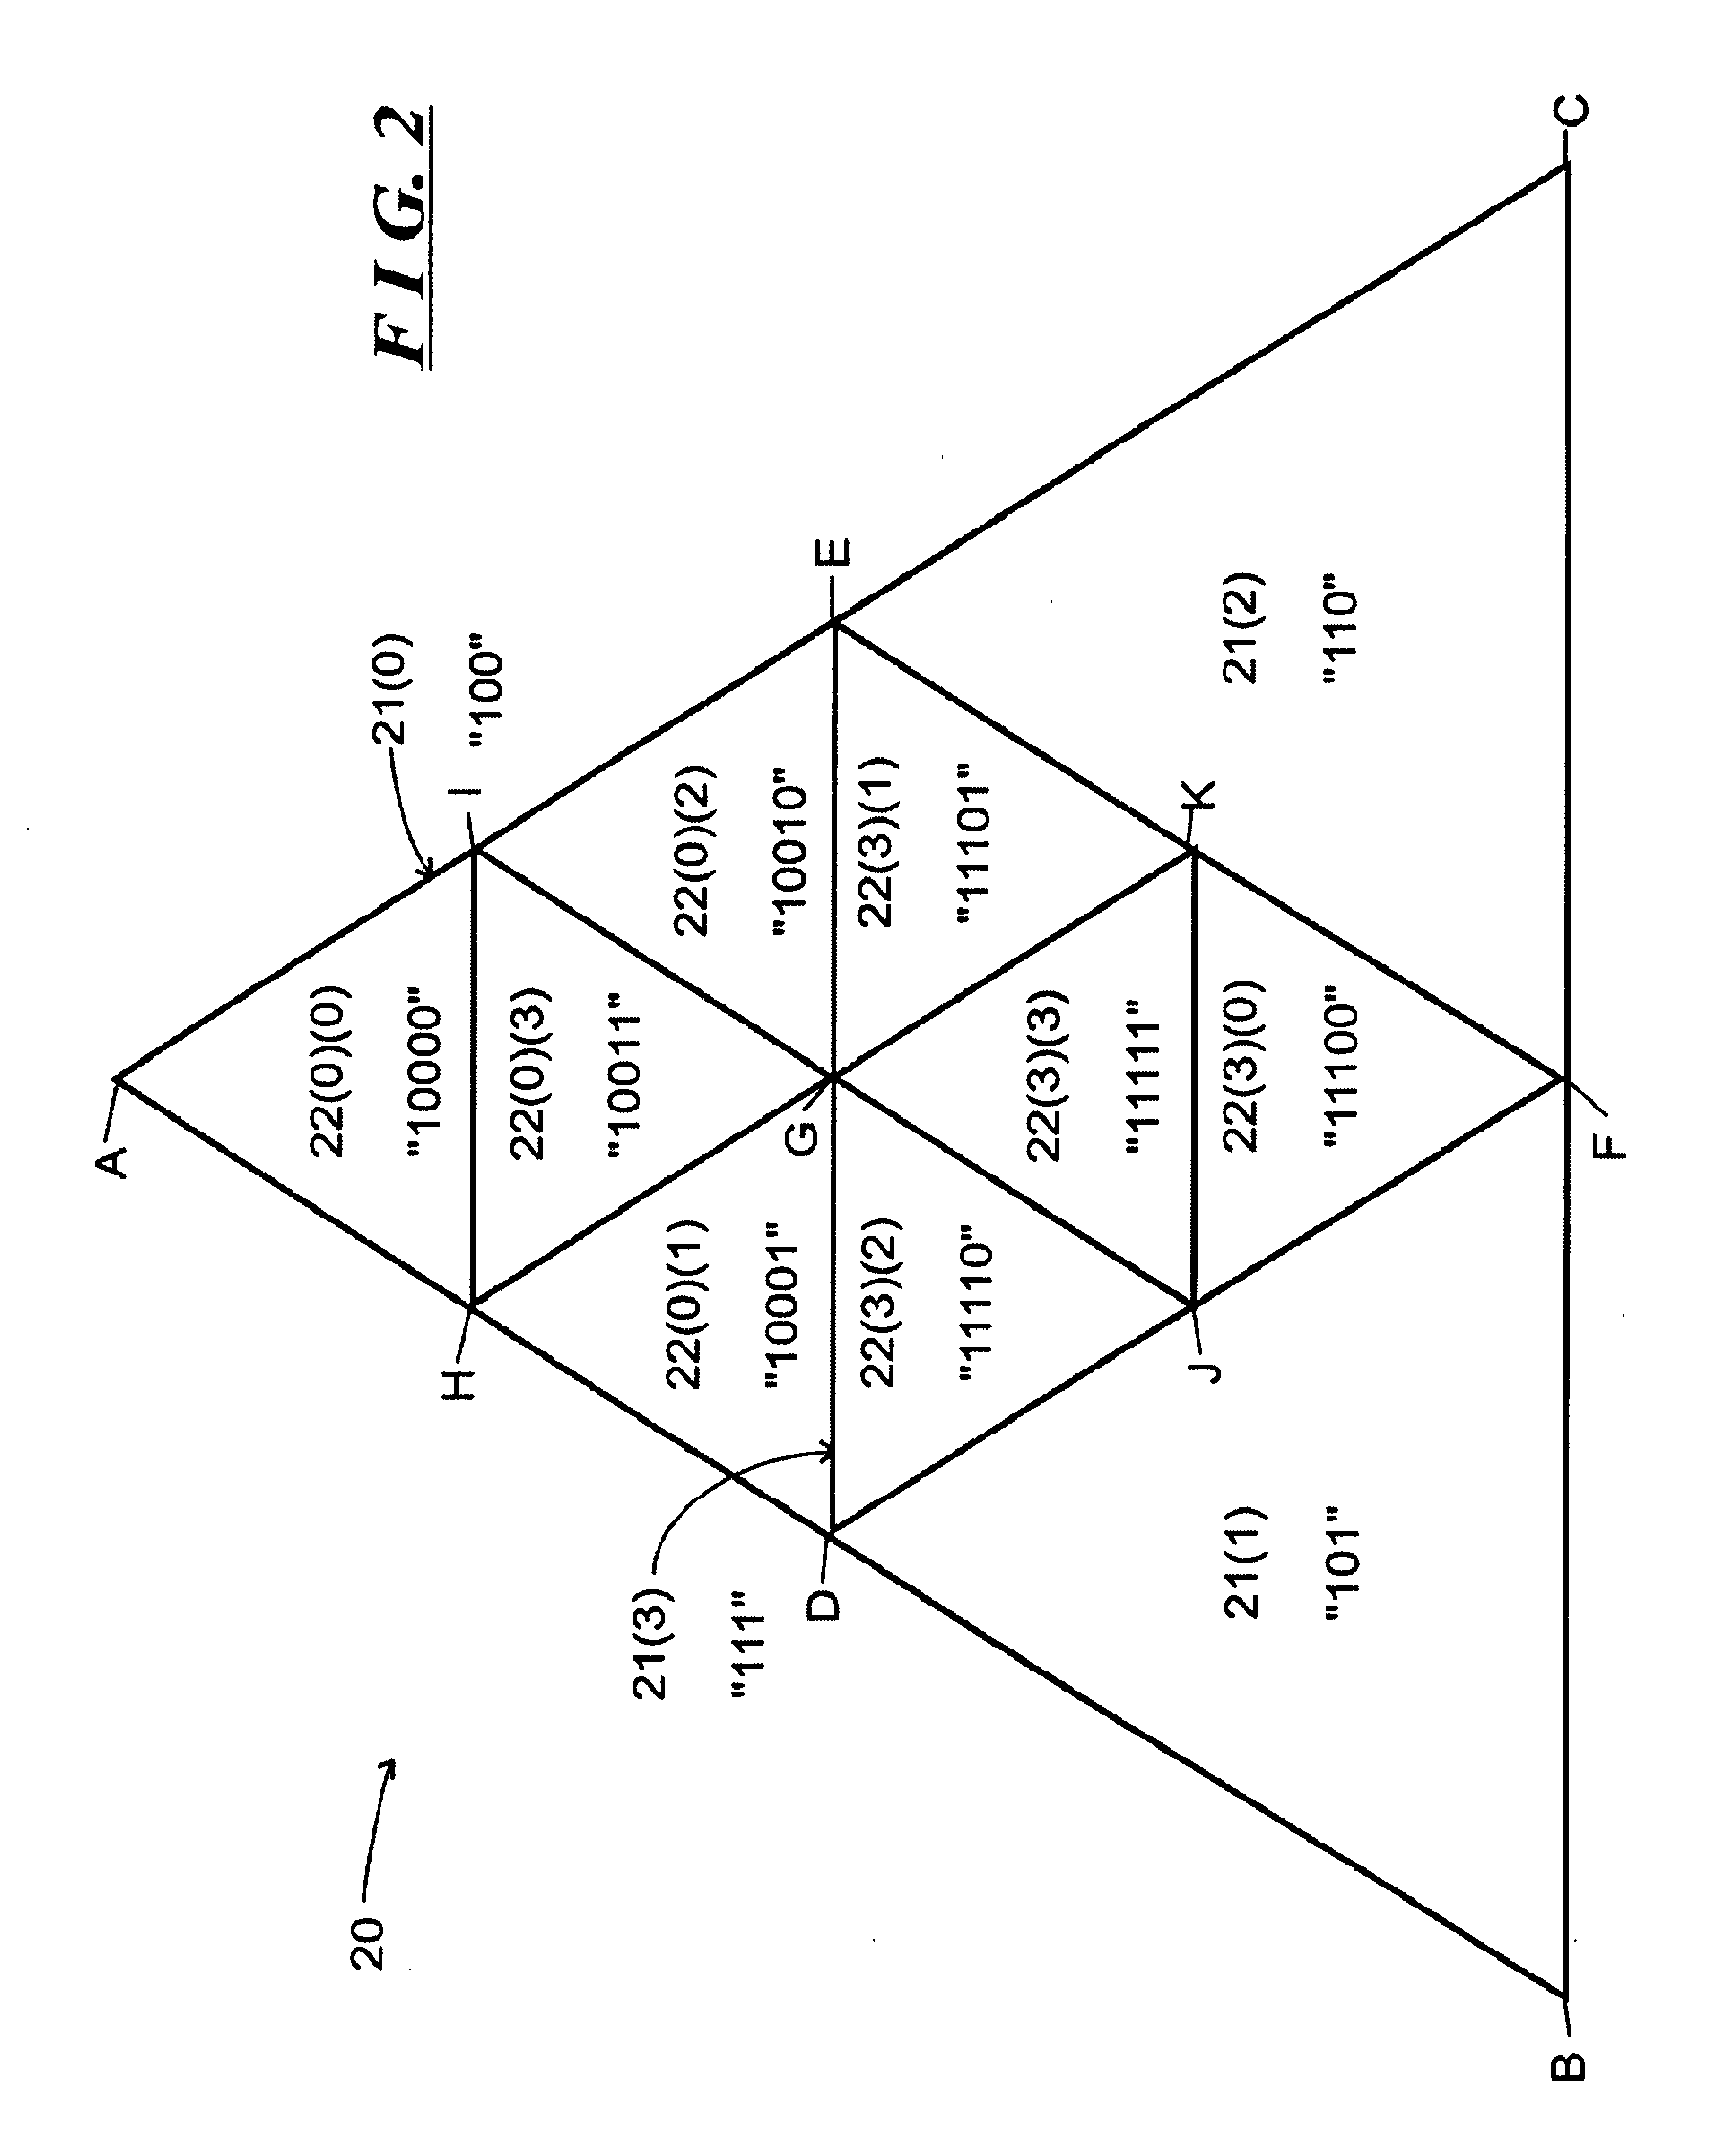 Computer graphics systems and methods for encoding subdivision triangular surfaces